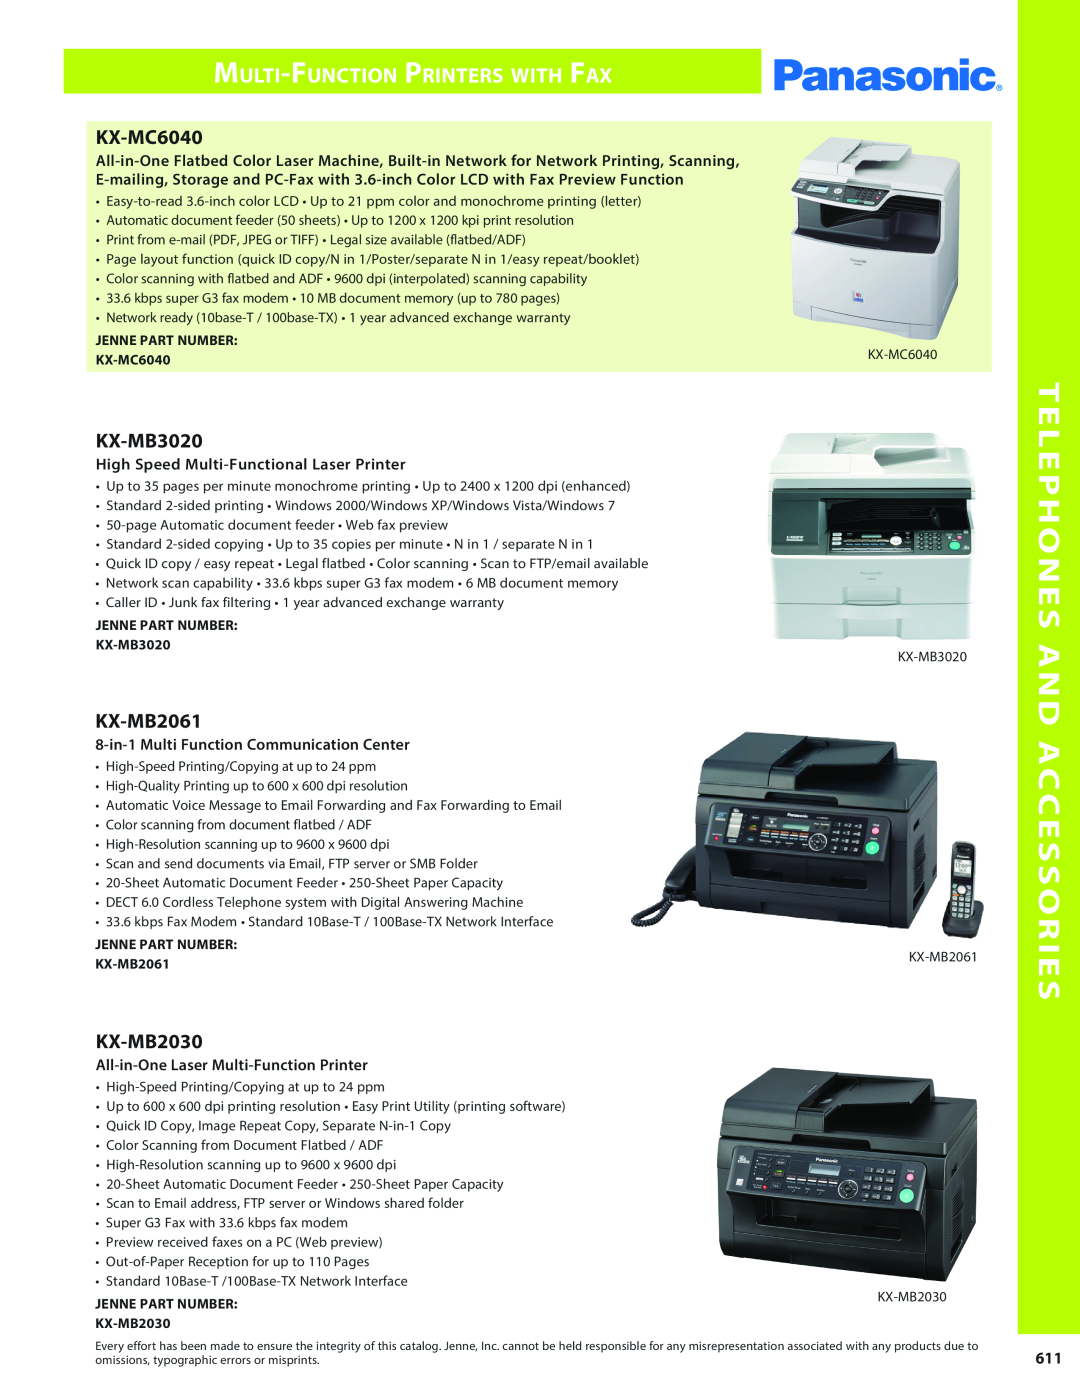 Panasonic PMPU2000 Multi-Function Printers with Fax, Telephones And Accessories, High Speed Multi-FunctionalLaser Printer 